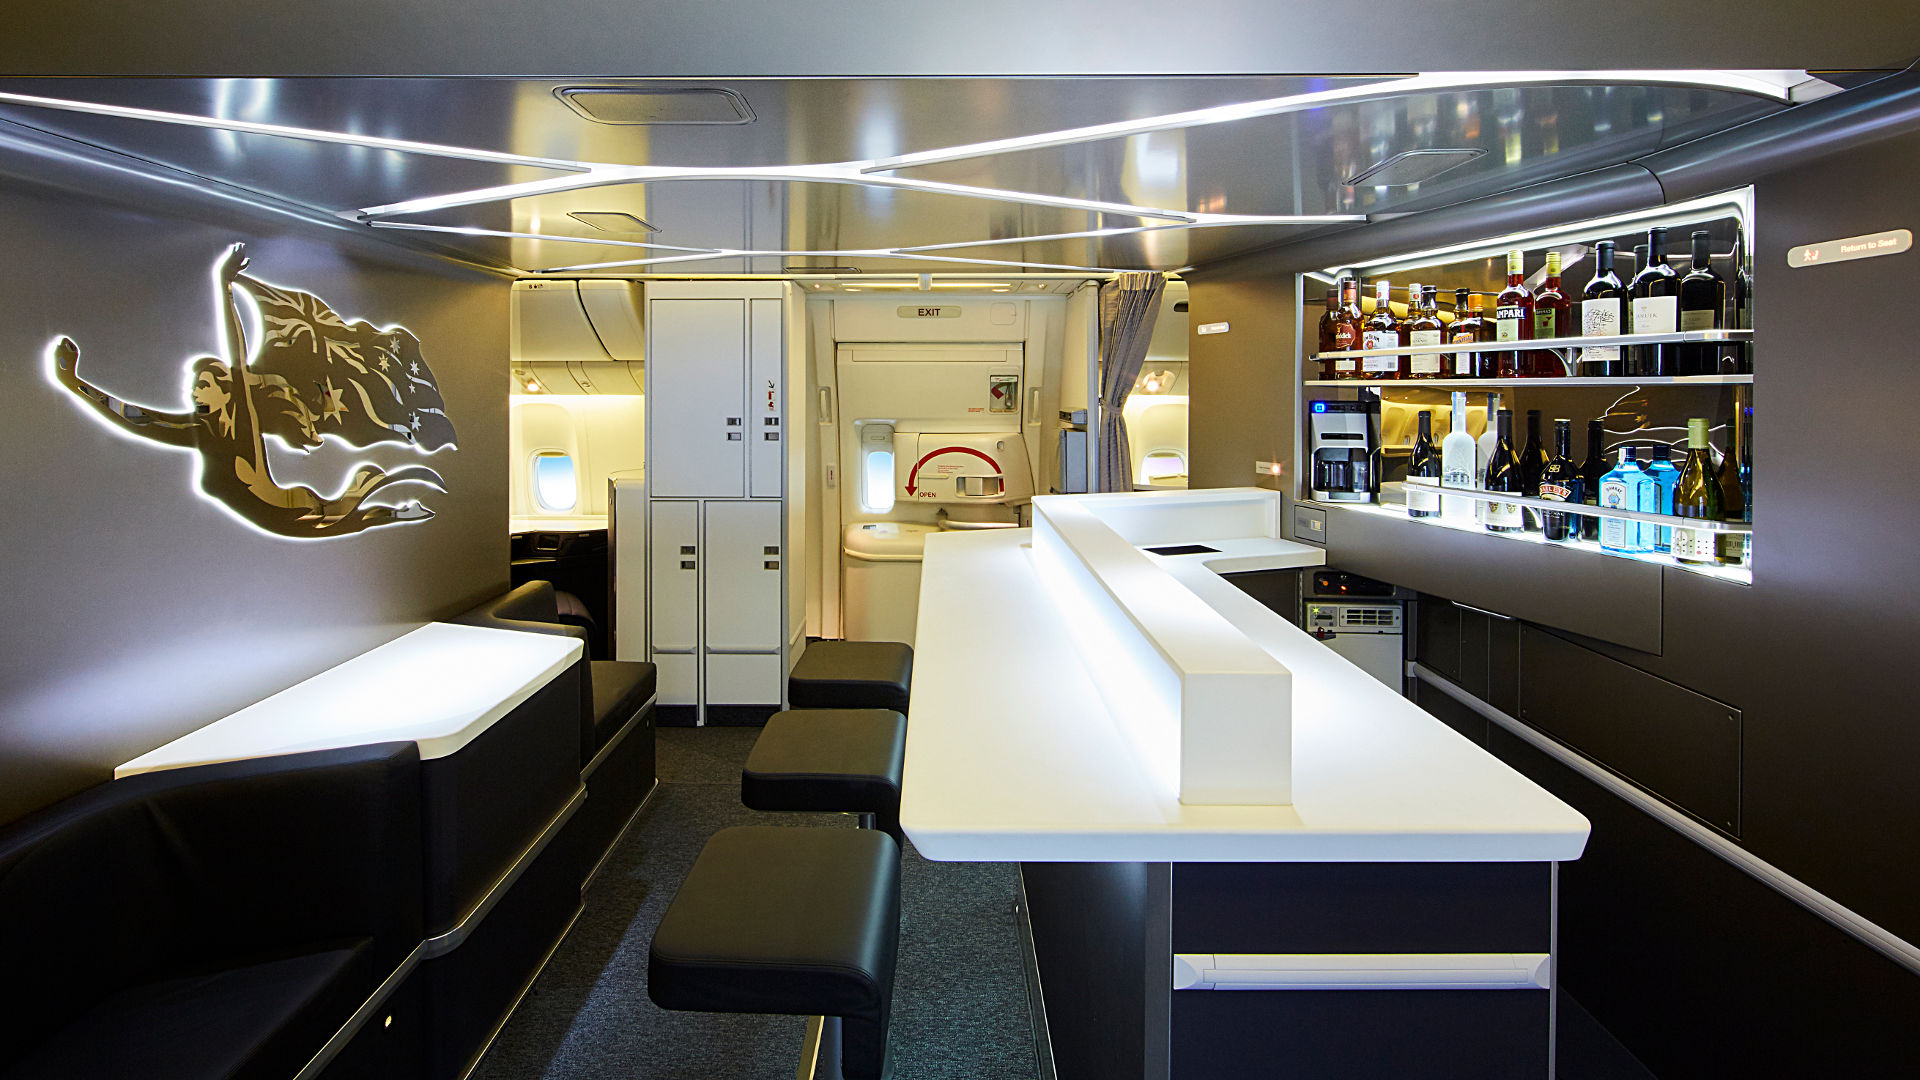 High fliers: 5 new business class suites to spend your miles on